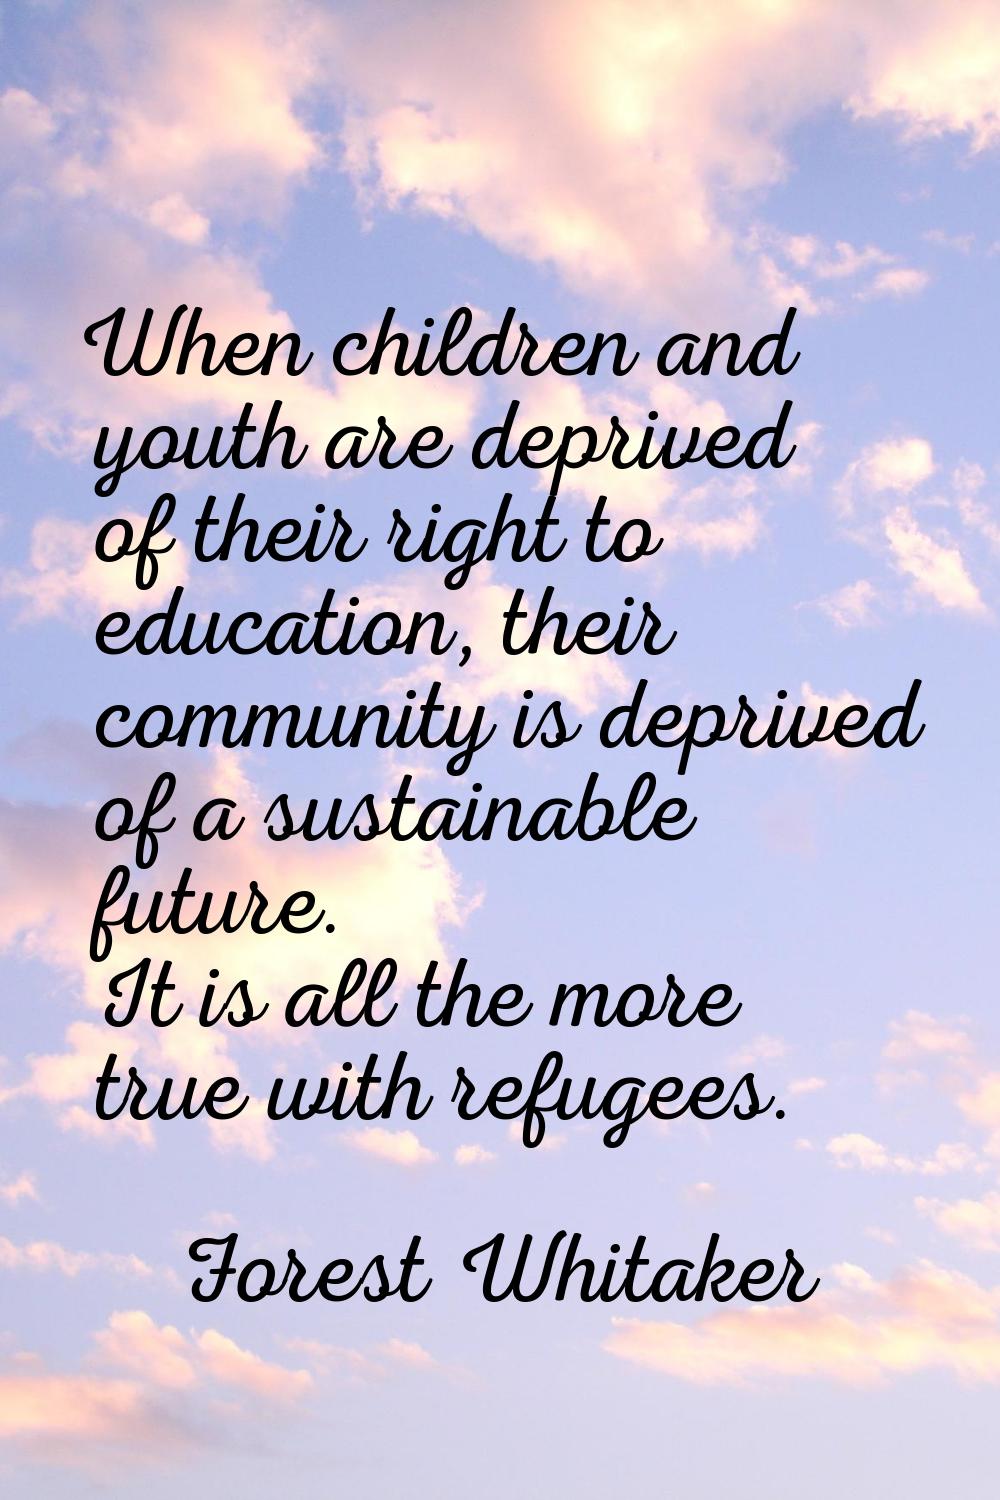 When children and youth are deprived of their right to education, their community is deprived of a 